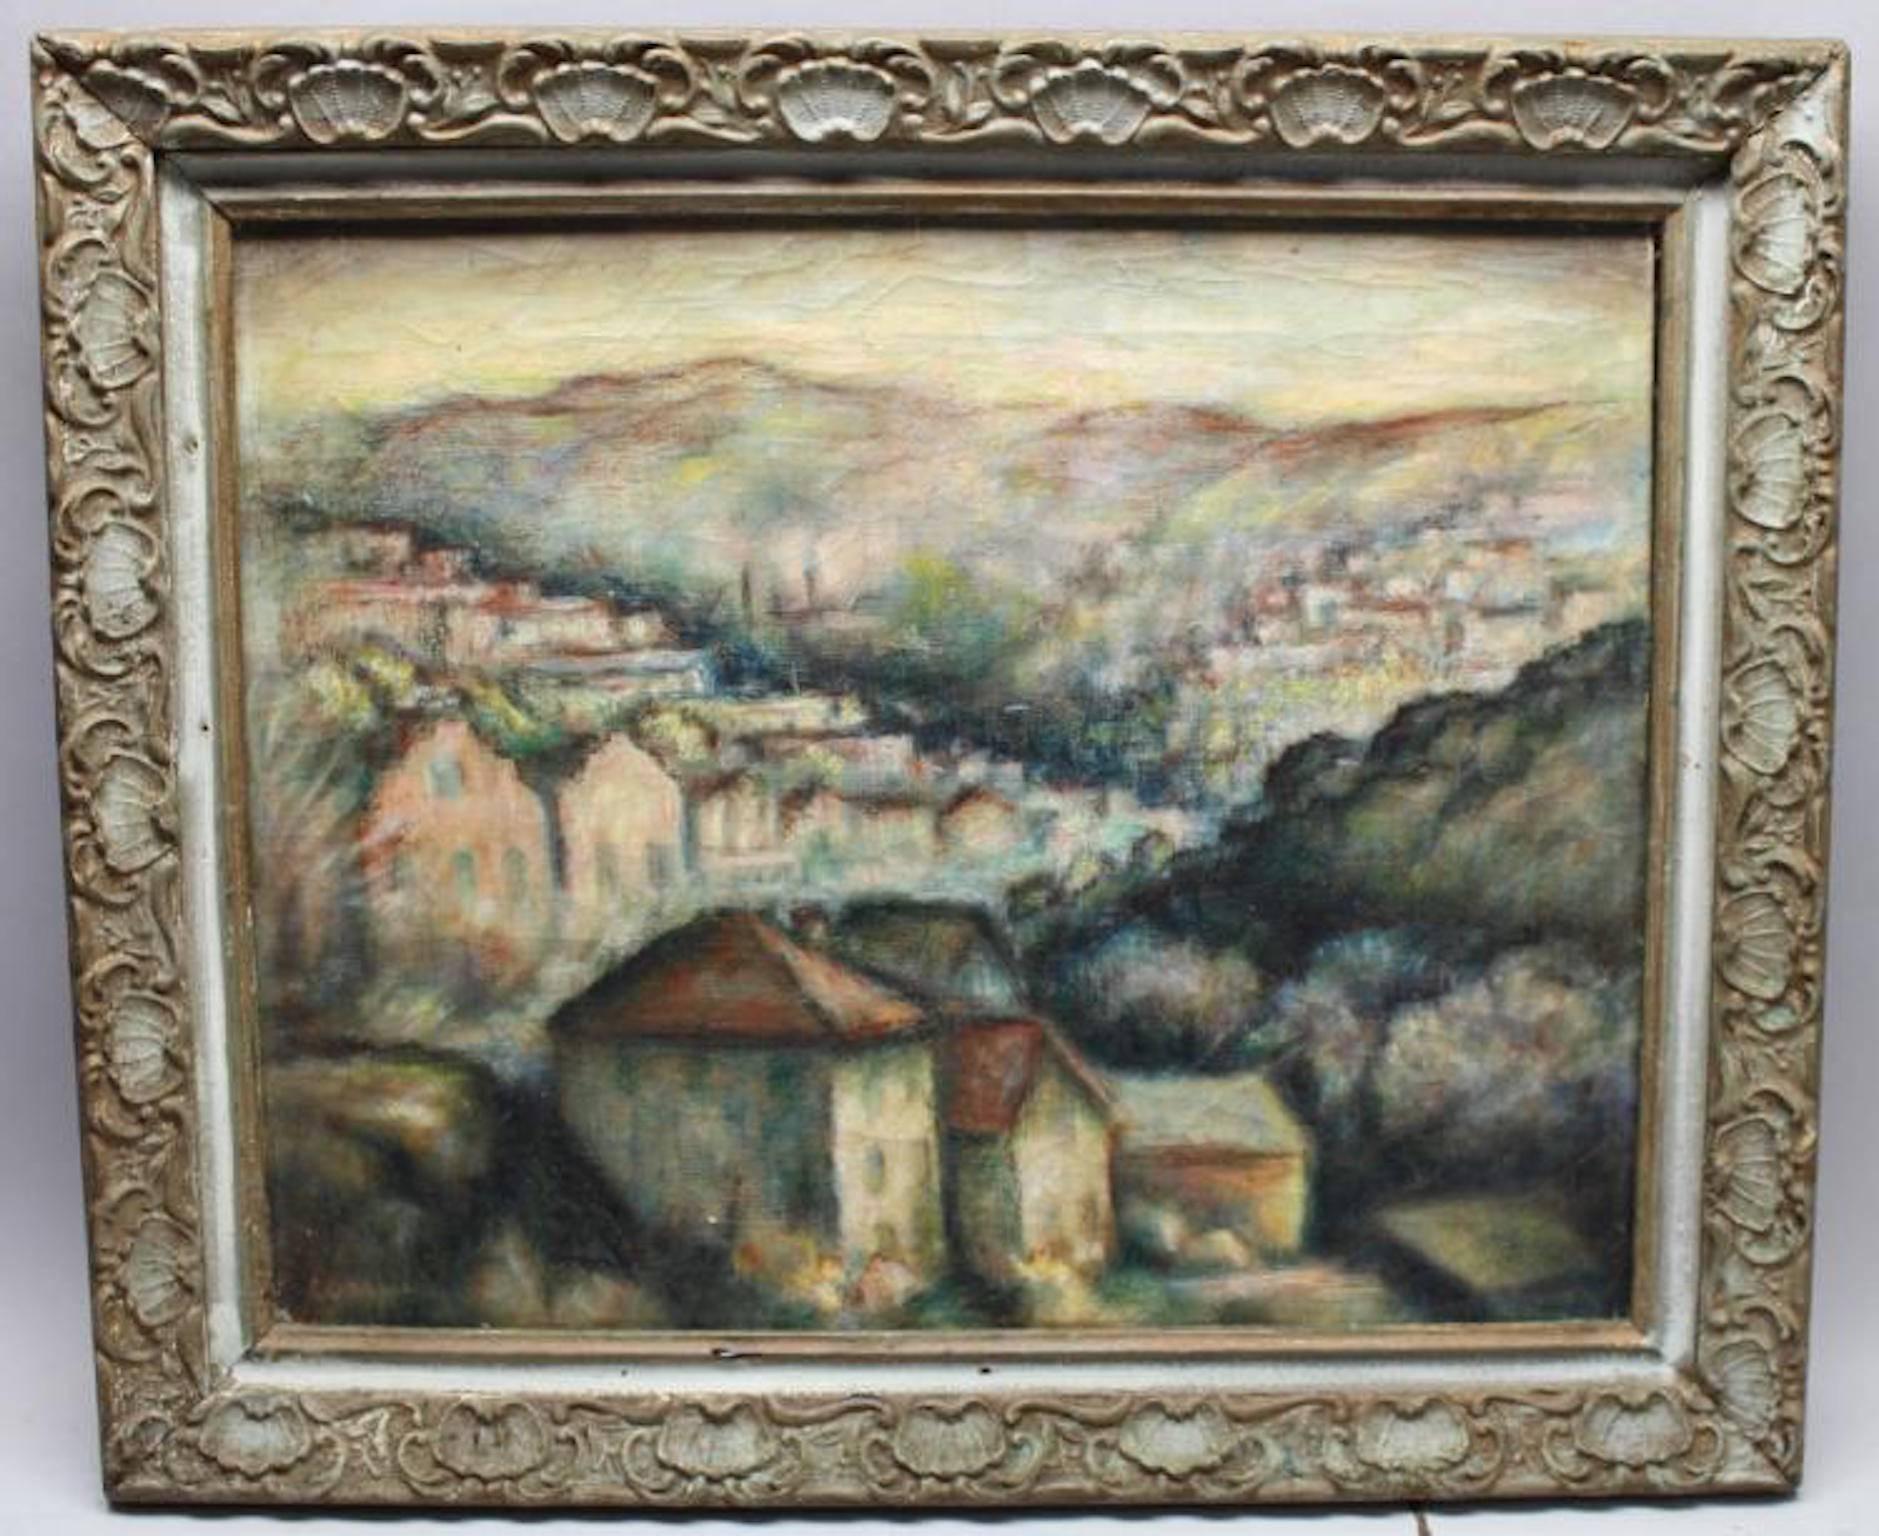 Signed early 20th century. French painting oil on canvas. Signed lower left. Depicting a landscape with a town near the horizon. Sight Size: 15.75 x 19.75 in.